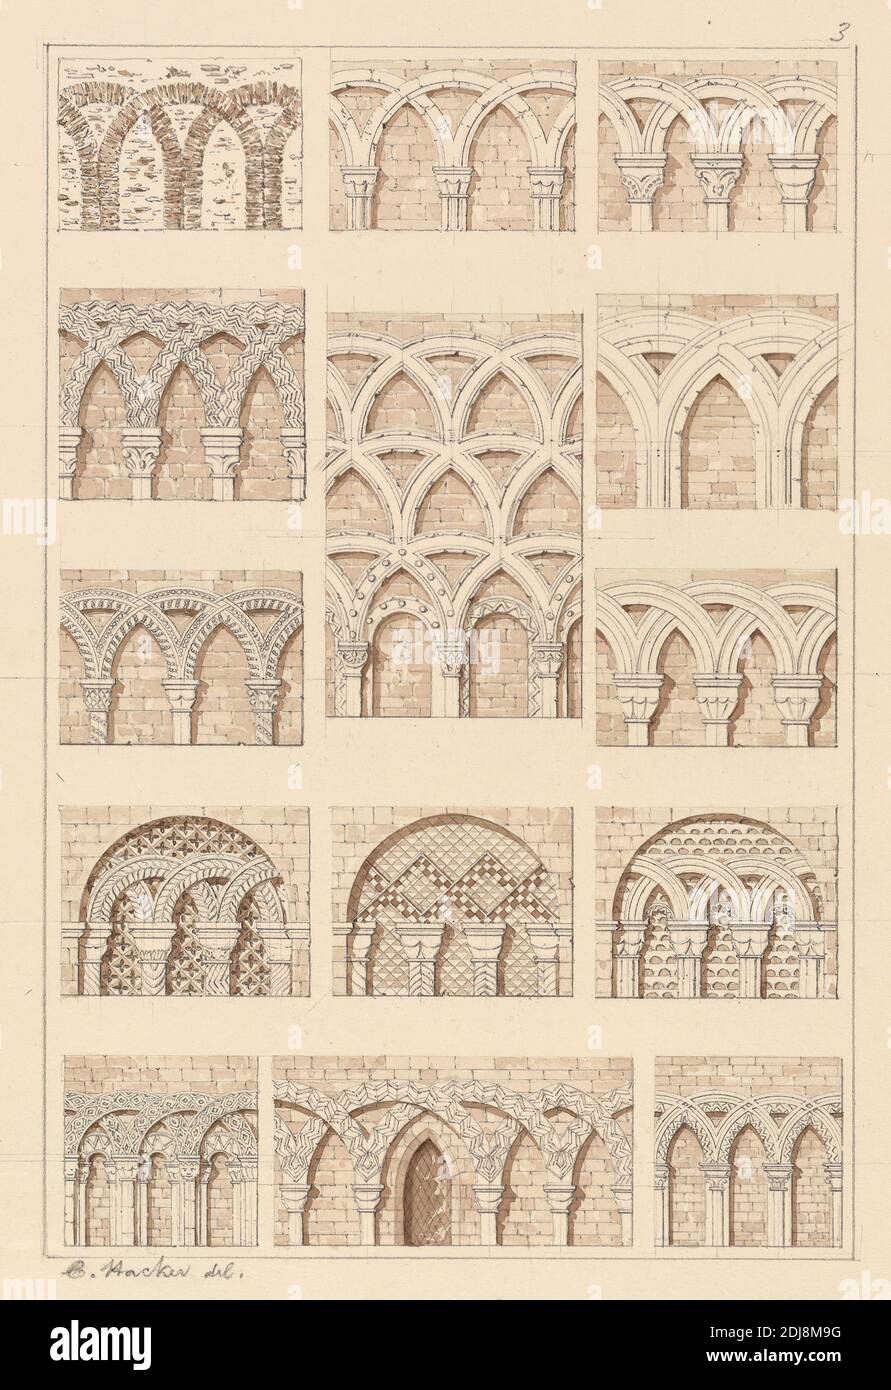 Arcades: of Interlaced Mouldings, C. Hacker, 1830, Pen and brown ink, graphite and brown wash on medium, slightly textured, cream wove paper, Sheet: 10 3/8 × 7 inches (26.4 × 17.8 cm), arcades, architectural subject Stock Photo